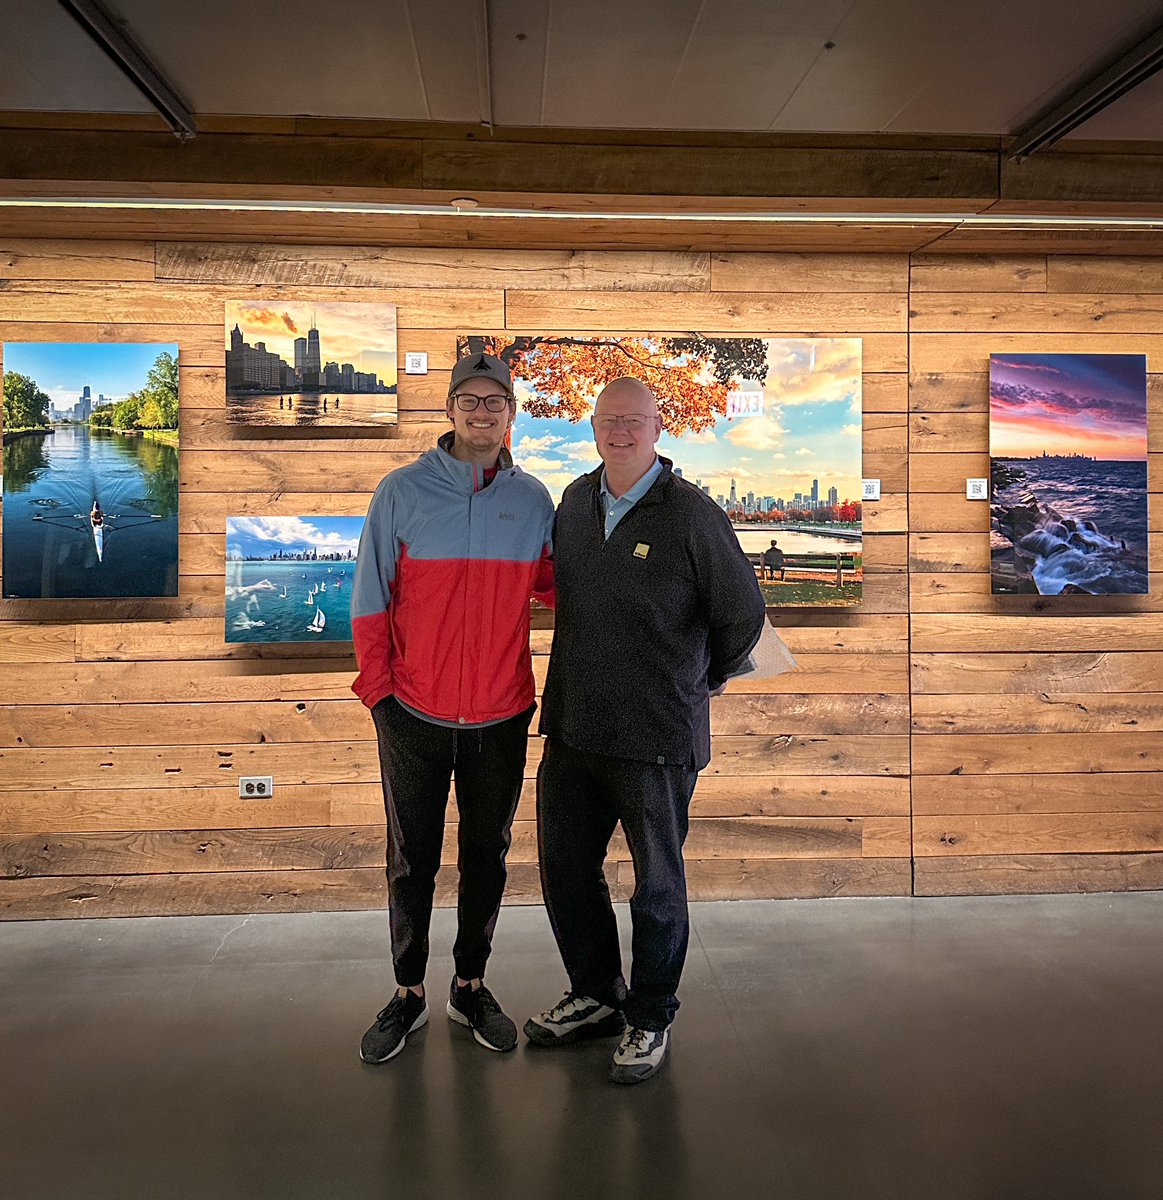 One of my sons came with me tonight to take in my photo exhibit at Navy Pier one last time. Thank you to those who visited over last 20 months!  Also, thank you to the people at Navy Pier for their partnership. “Flow - Water Brings Life To Chicago”, I hope you enjoyed the views.